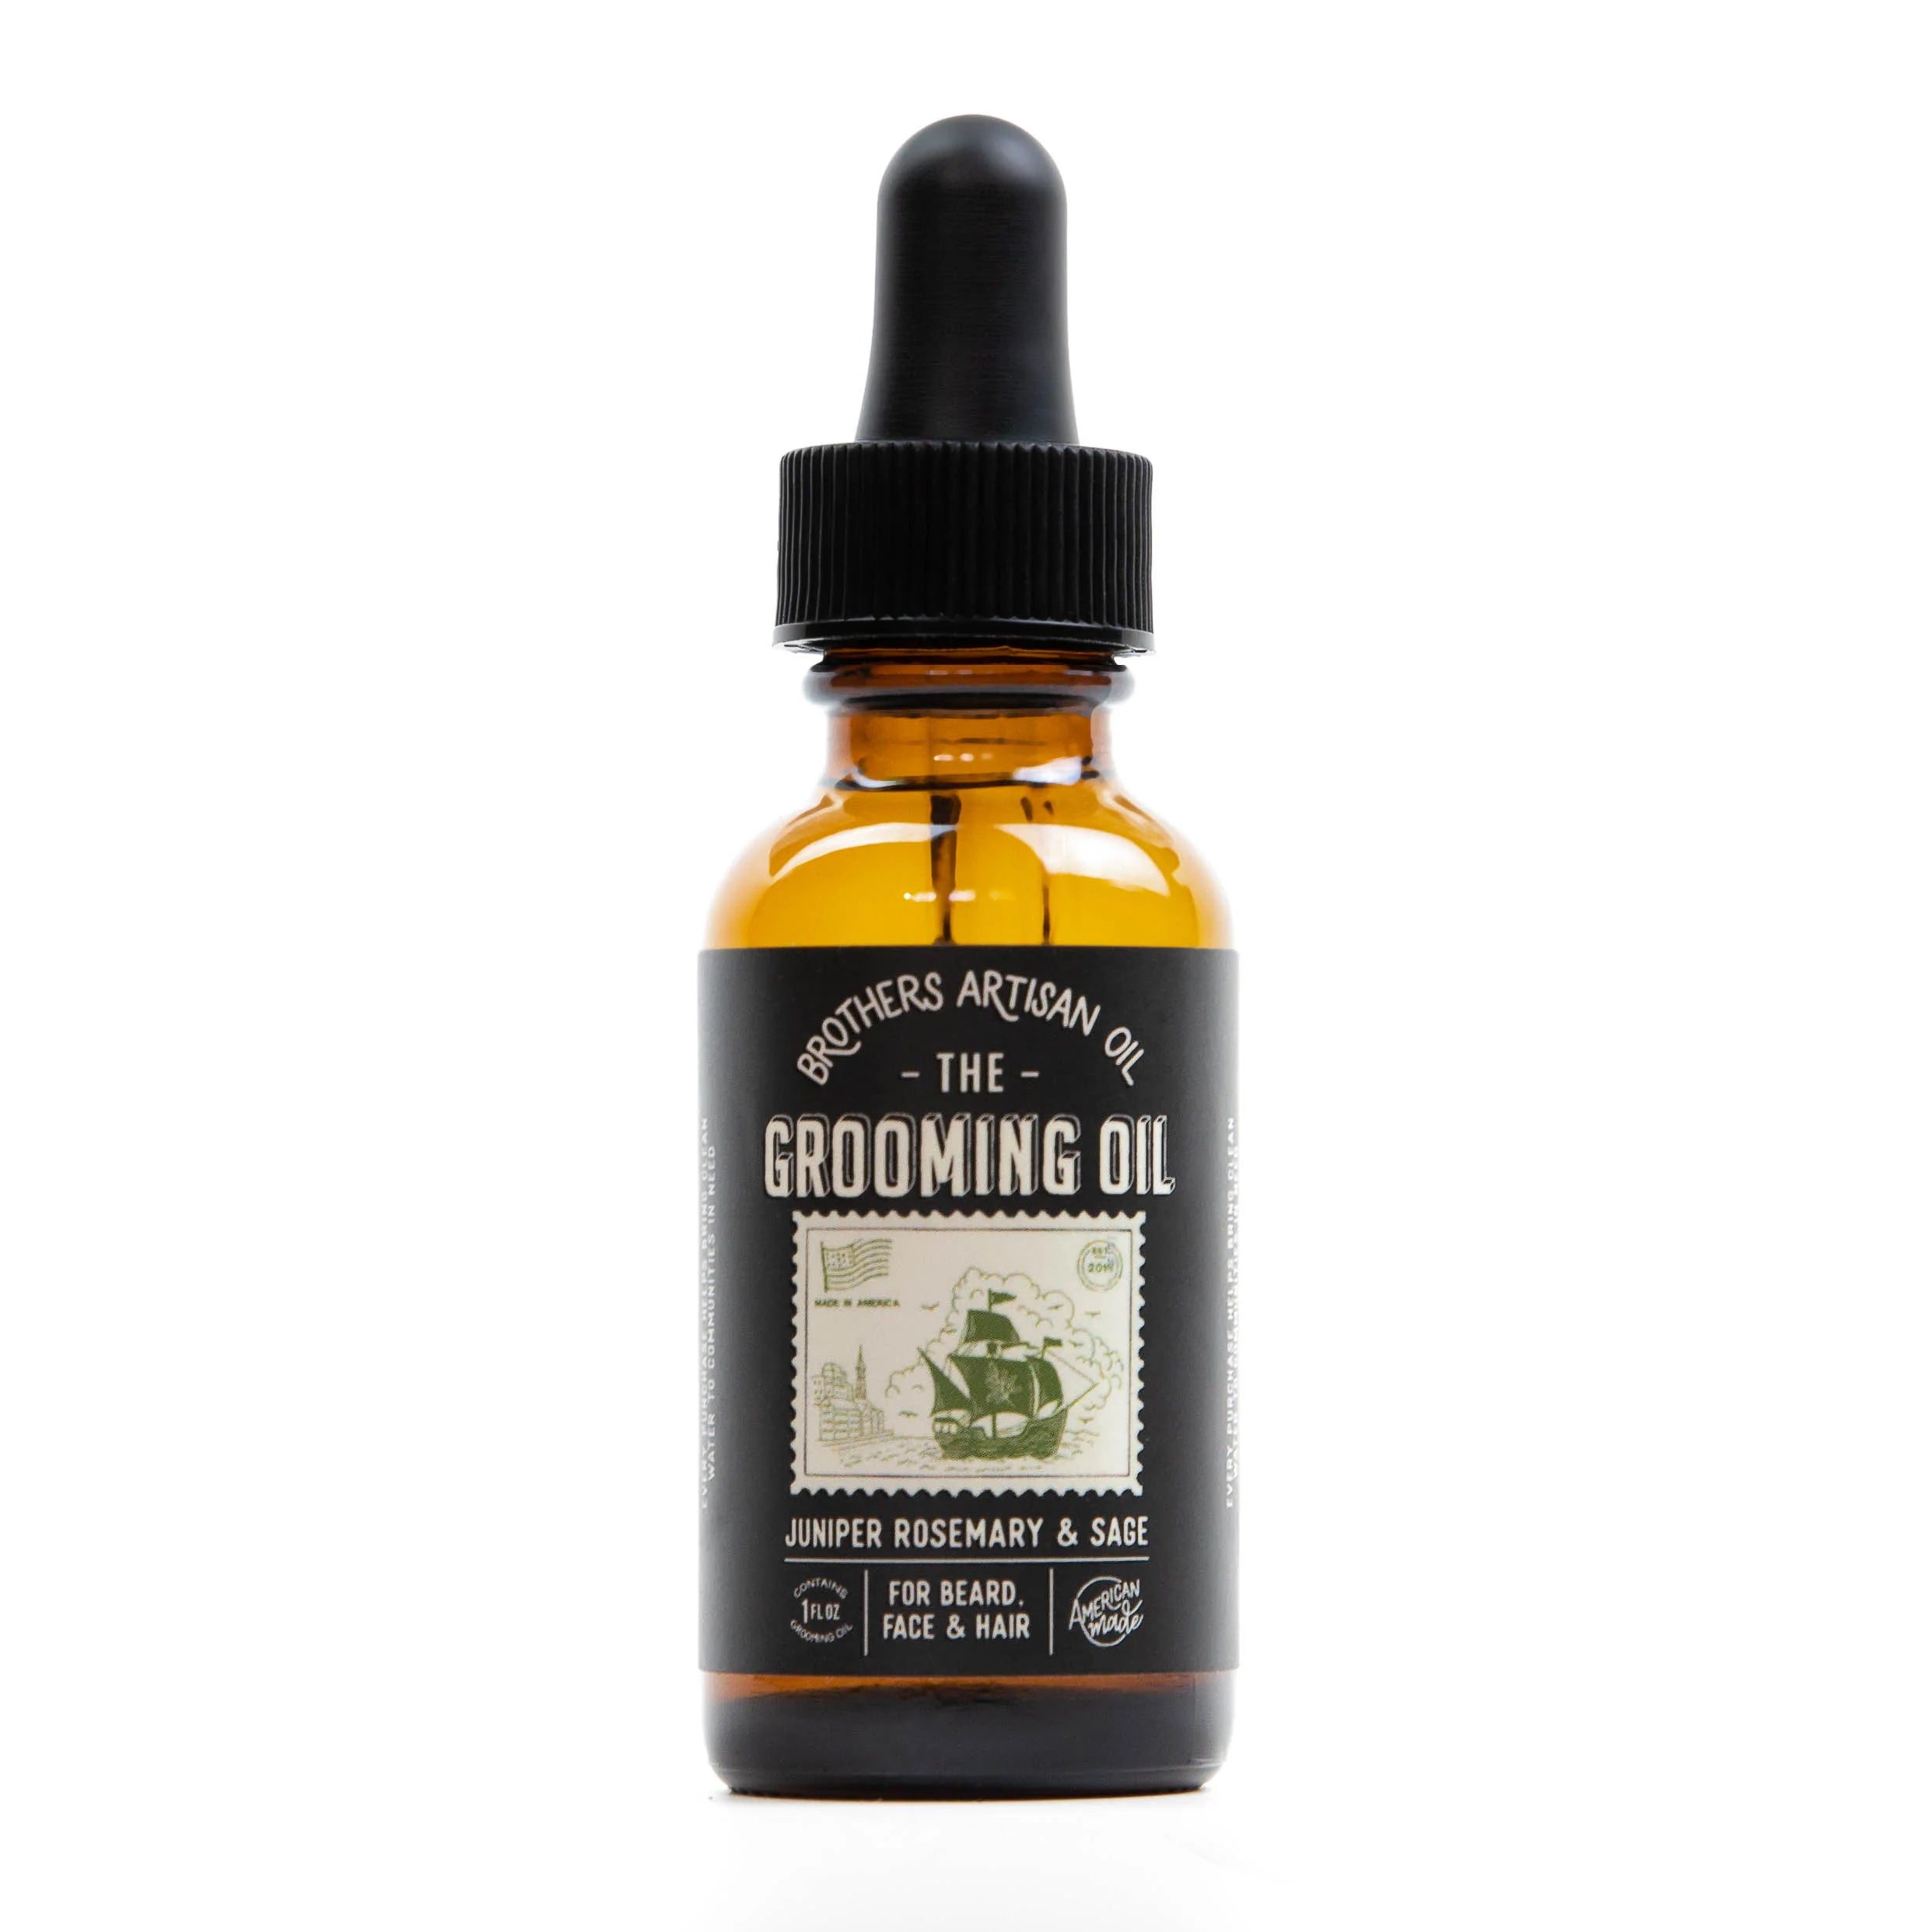  The Grooming Oil: Juniper Rosemary & Sage by Brothers Artisan Oil Brothers Artisan Oil Perfumarie